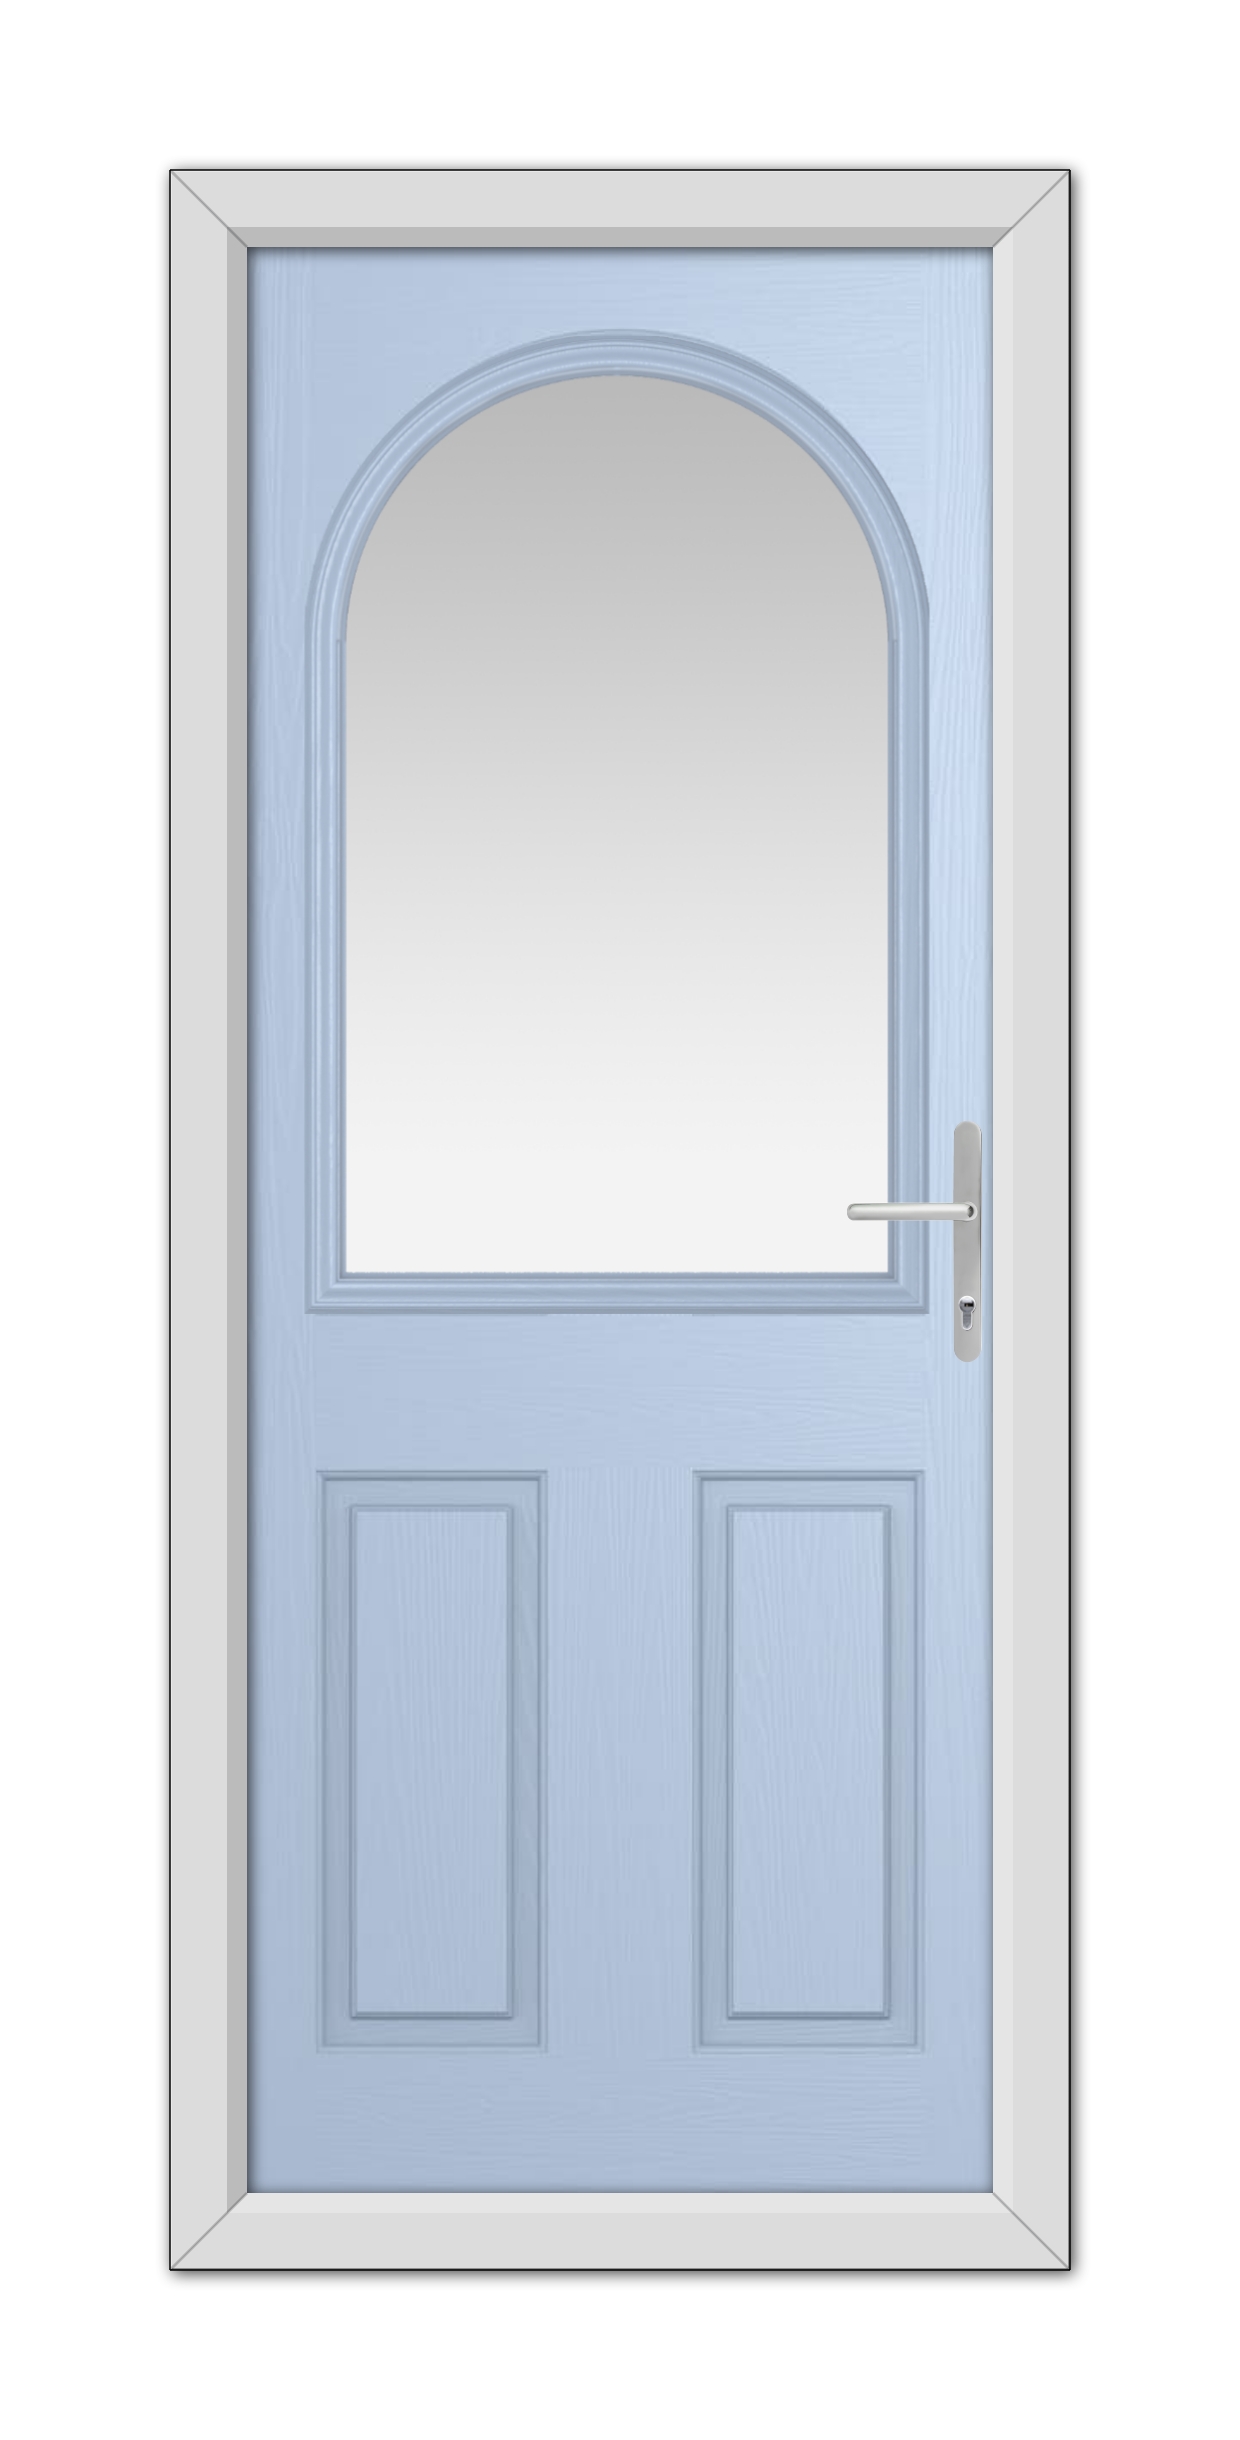 An illustration of a closed Duck Egg Blue Grafton Composite Door with an arched top, featuring a white frame and a modern handle on the right side.